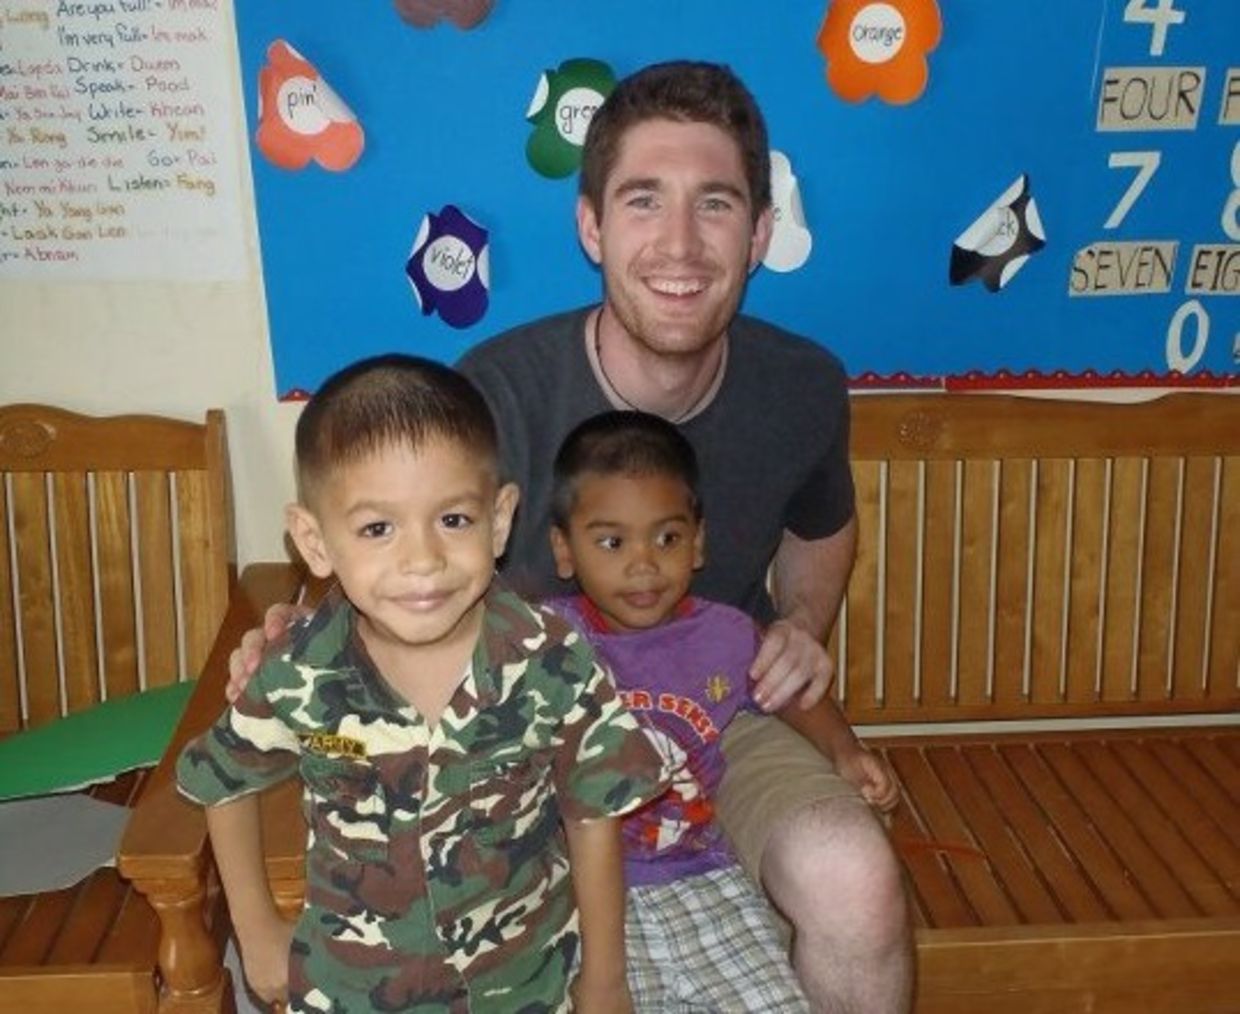 Christian Clark with children at daycare in Thailand (courtesy of Projects Abroad)